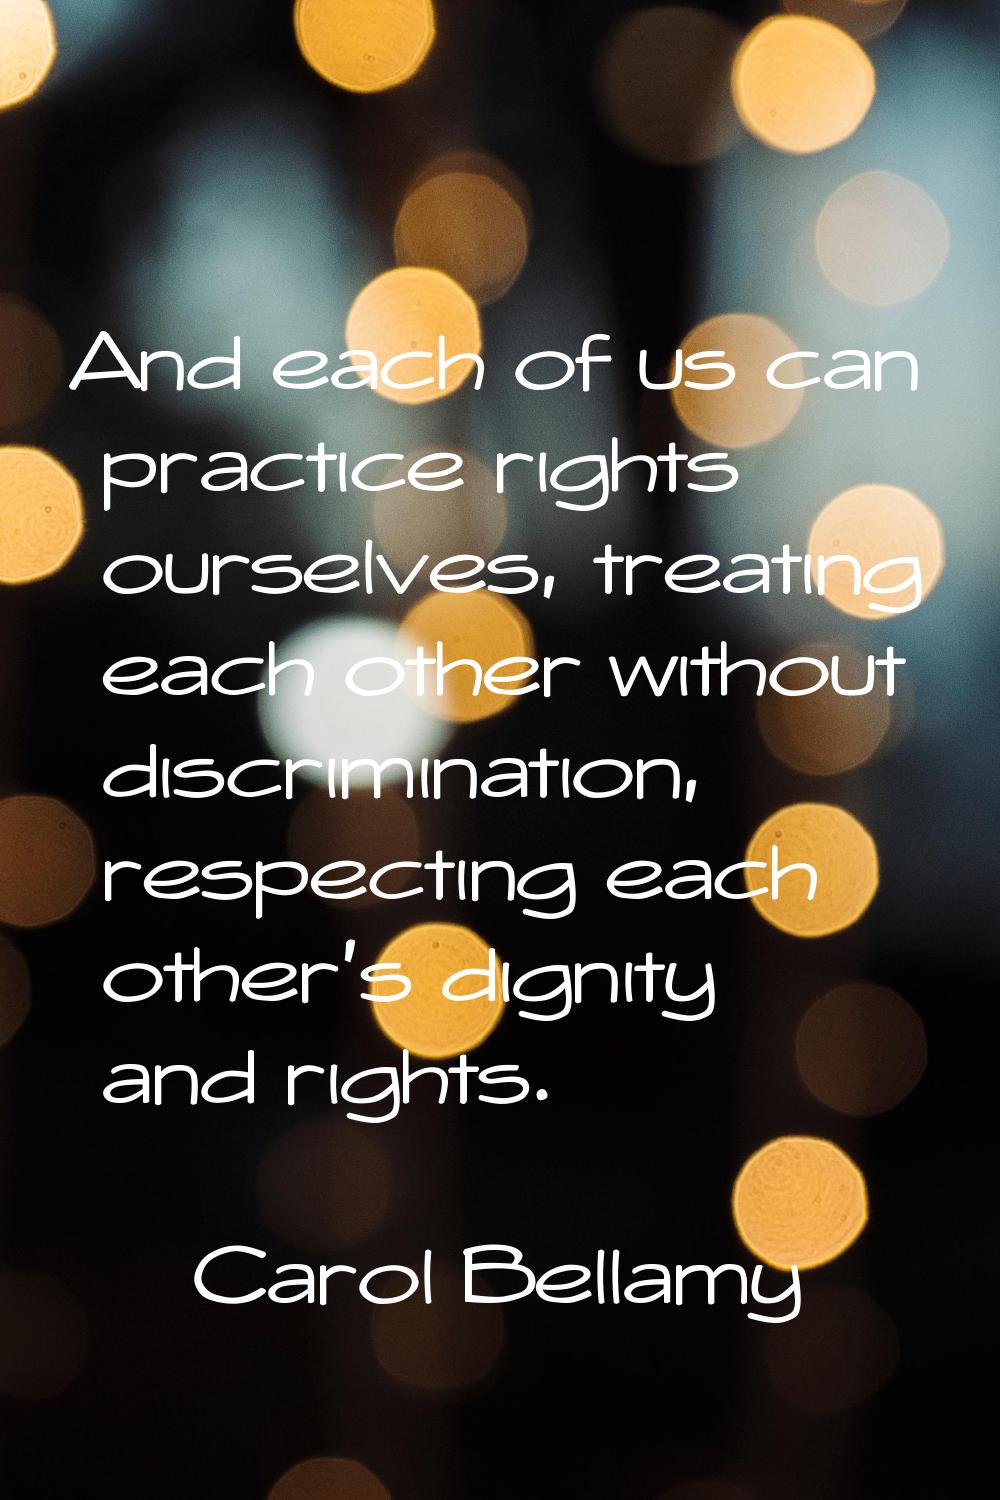 And each of us can practice rights ourselves, treating each other without discrimination, respectin